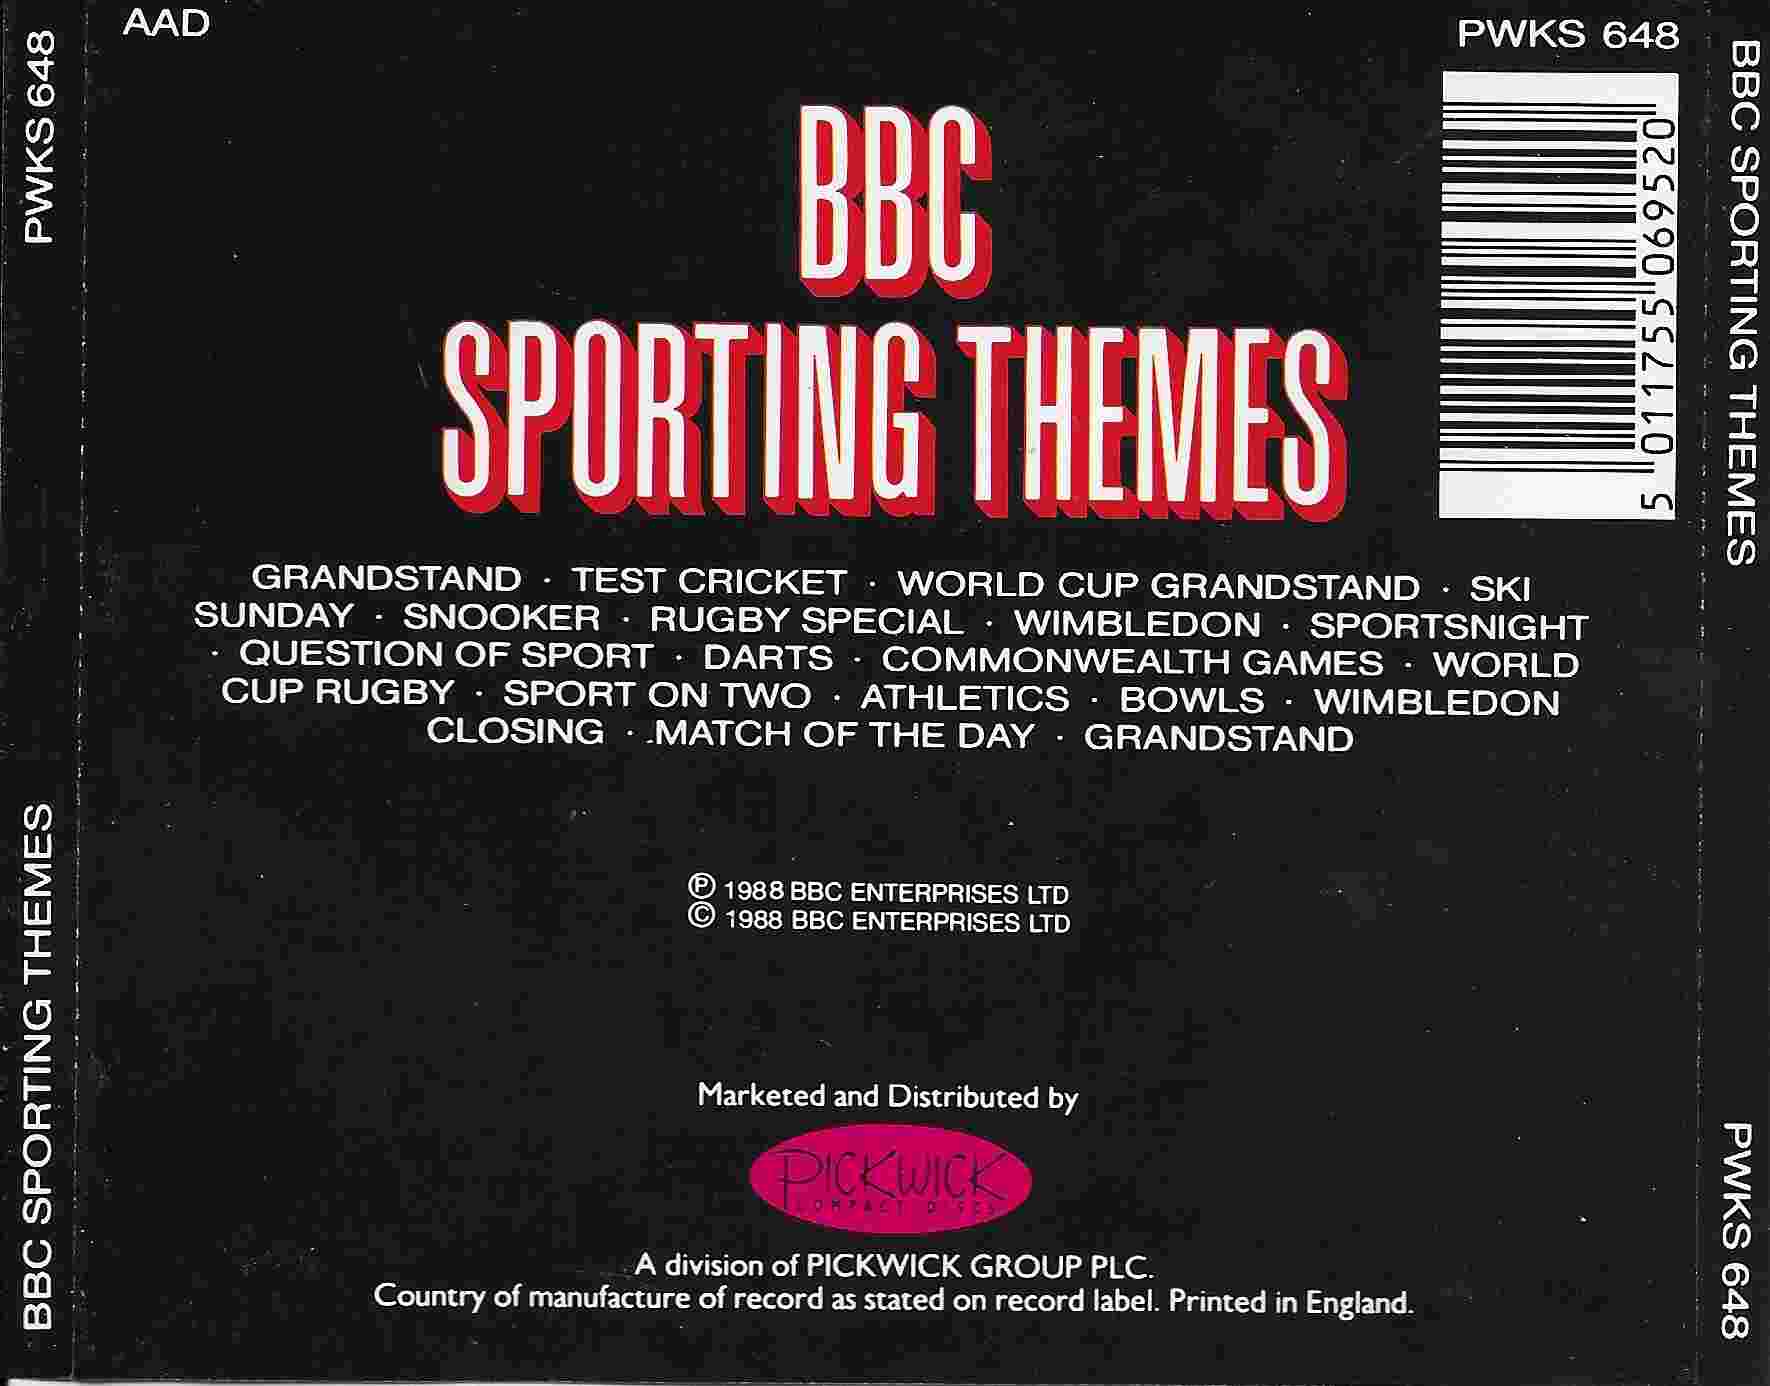 Picture of PWKS 648 BBC sporting themes by artist Various from the BBC records and Tapes library